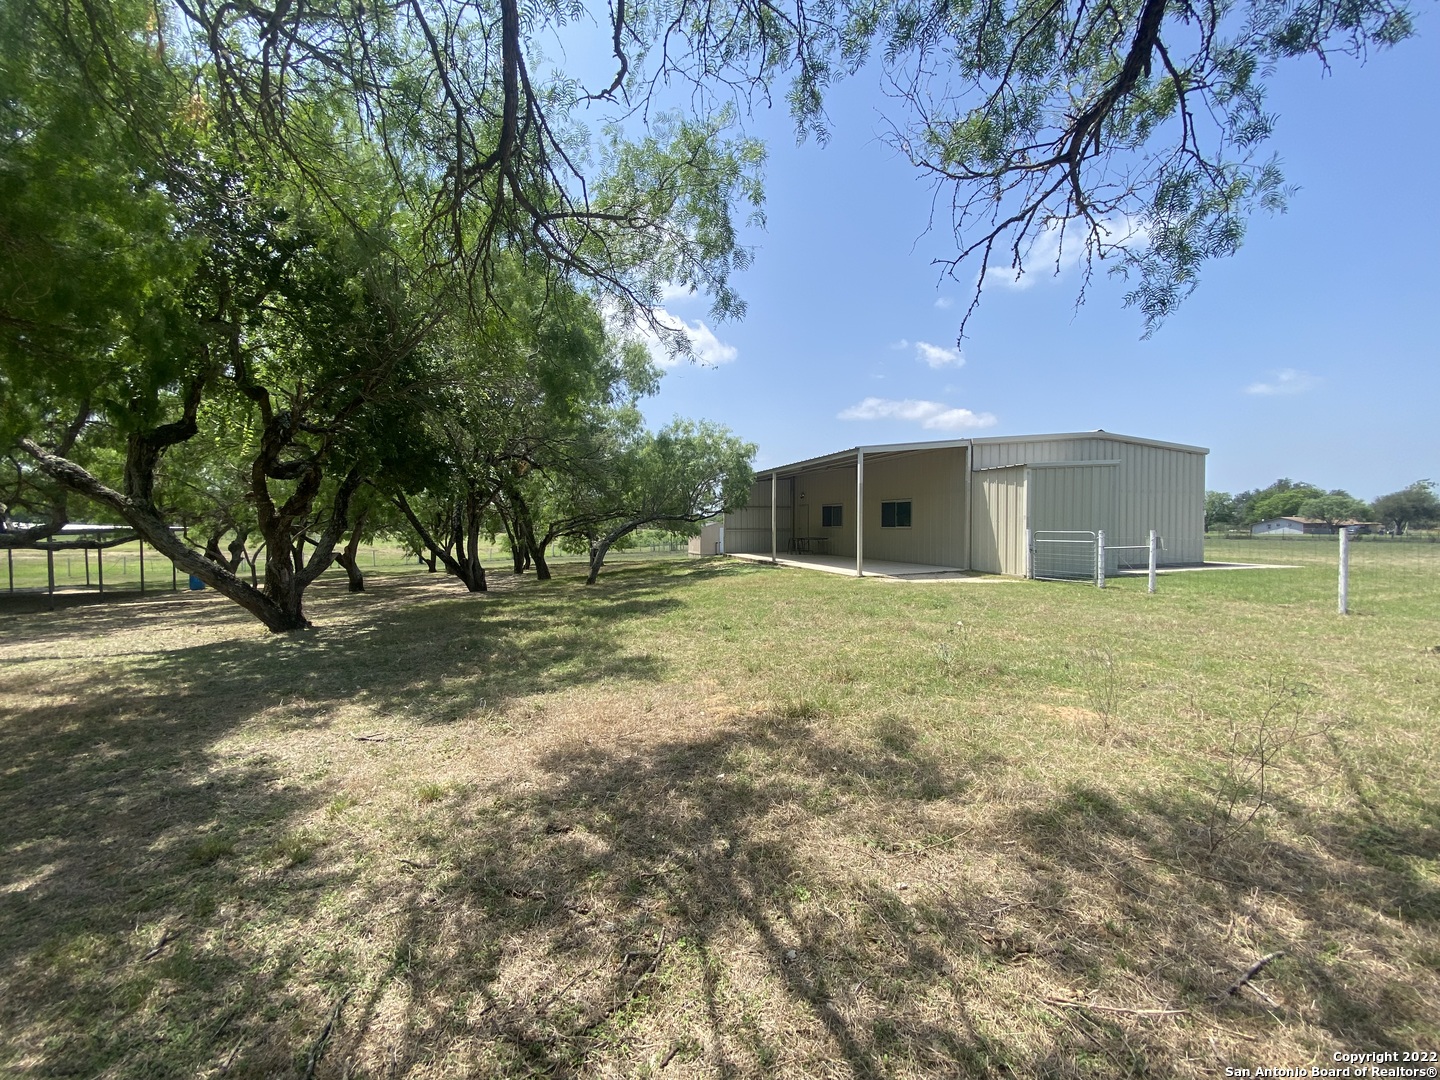 One of a kind 10.61 acres with 30X40 clean metal building to stretch out on! Build your dream home, bring a manufactured home in or finish out the metal building for a barn dominium! Minutes from San Antonio, City Base, Floresville, and Calaveras Lake. 2 septic tanks, working water well with cistern. The metal building has 2 HVAC systems (1 electric & 1 Propane) 1 window unit. Large gazebo and side porch. Small shed. There is also a tank (can be stocked with fish, is dry right now) on the property. If you want to stretch out a little more there is 10.61 acres (track 2) behind it for sale. Check the FEMA Flood Zone. Part of the property is in the 500 yr. flood zone. Hurry don't miss out the possibilities are endless!